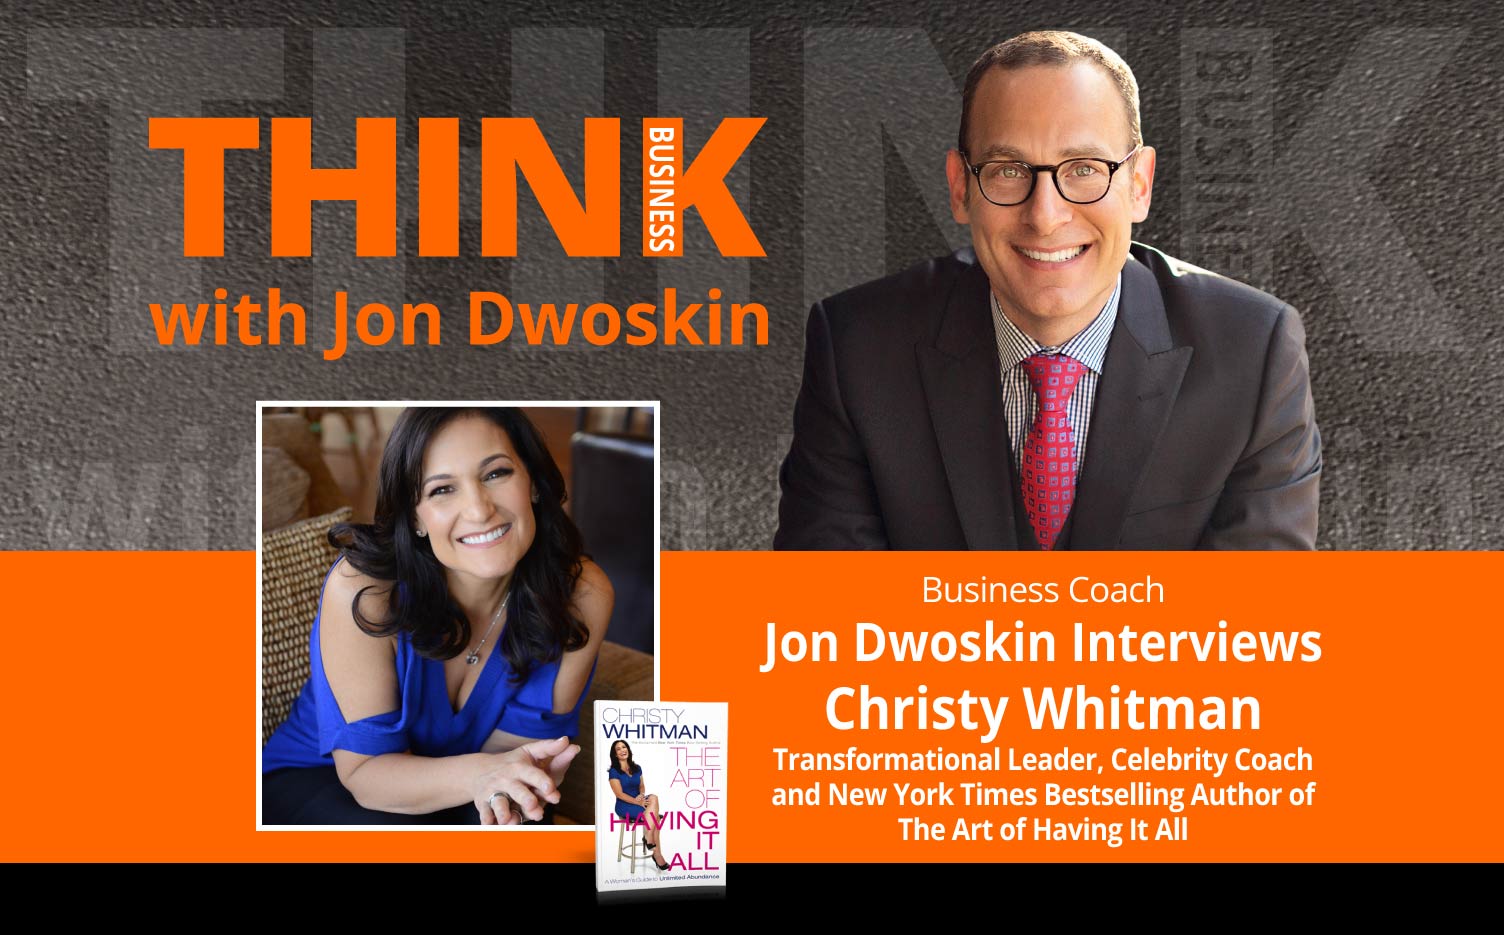 THINK Business Podcast: Jon Dwoskin Interviews Christy Whitman, Transformational Leader, Celebrity Coach and New York Times Bestselling Author of The Art of Having It All